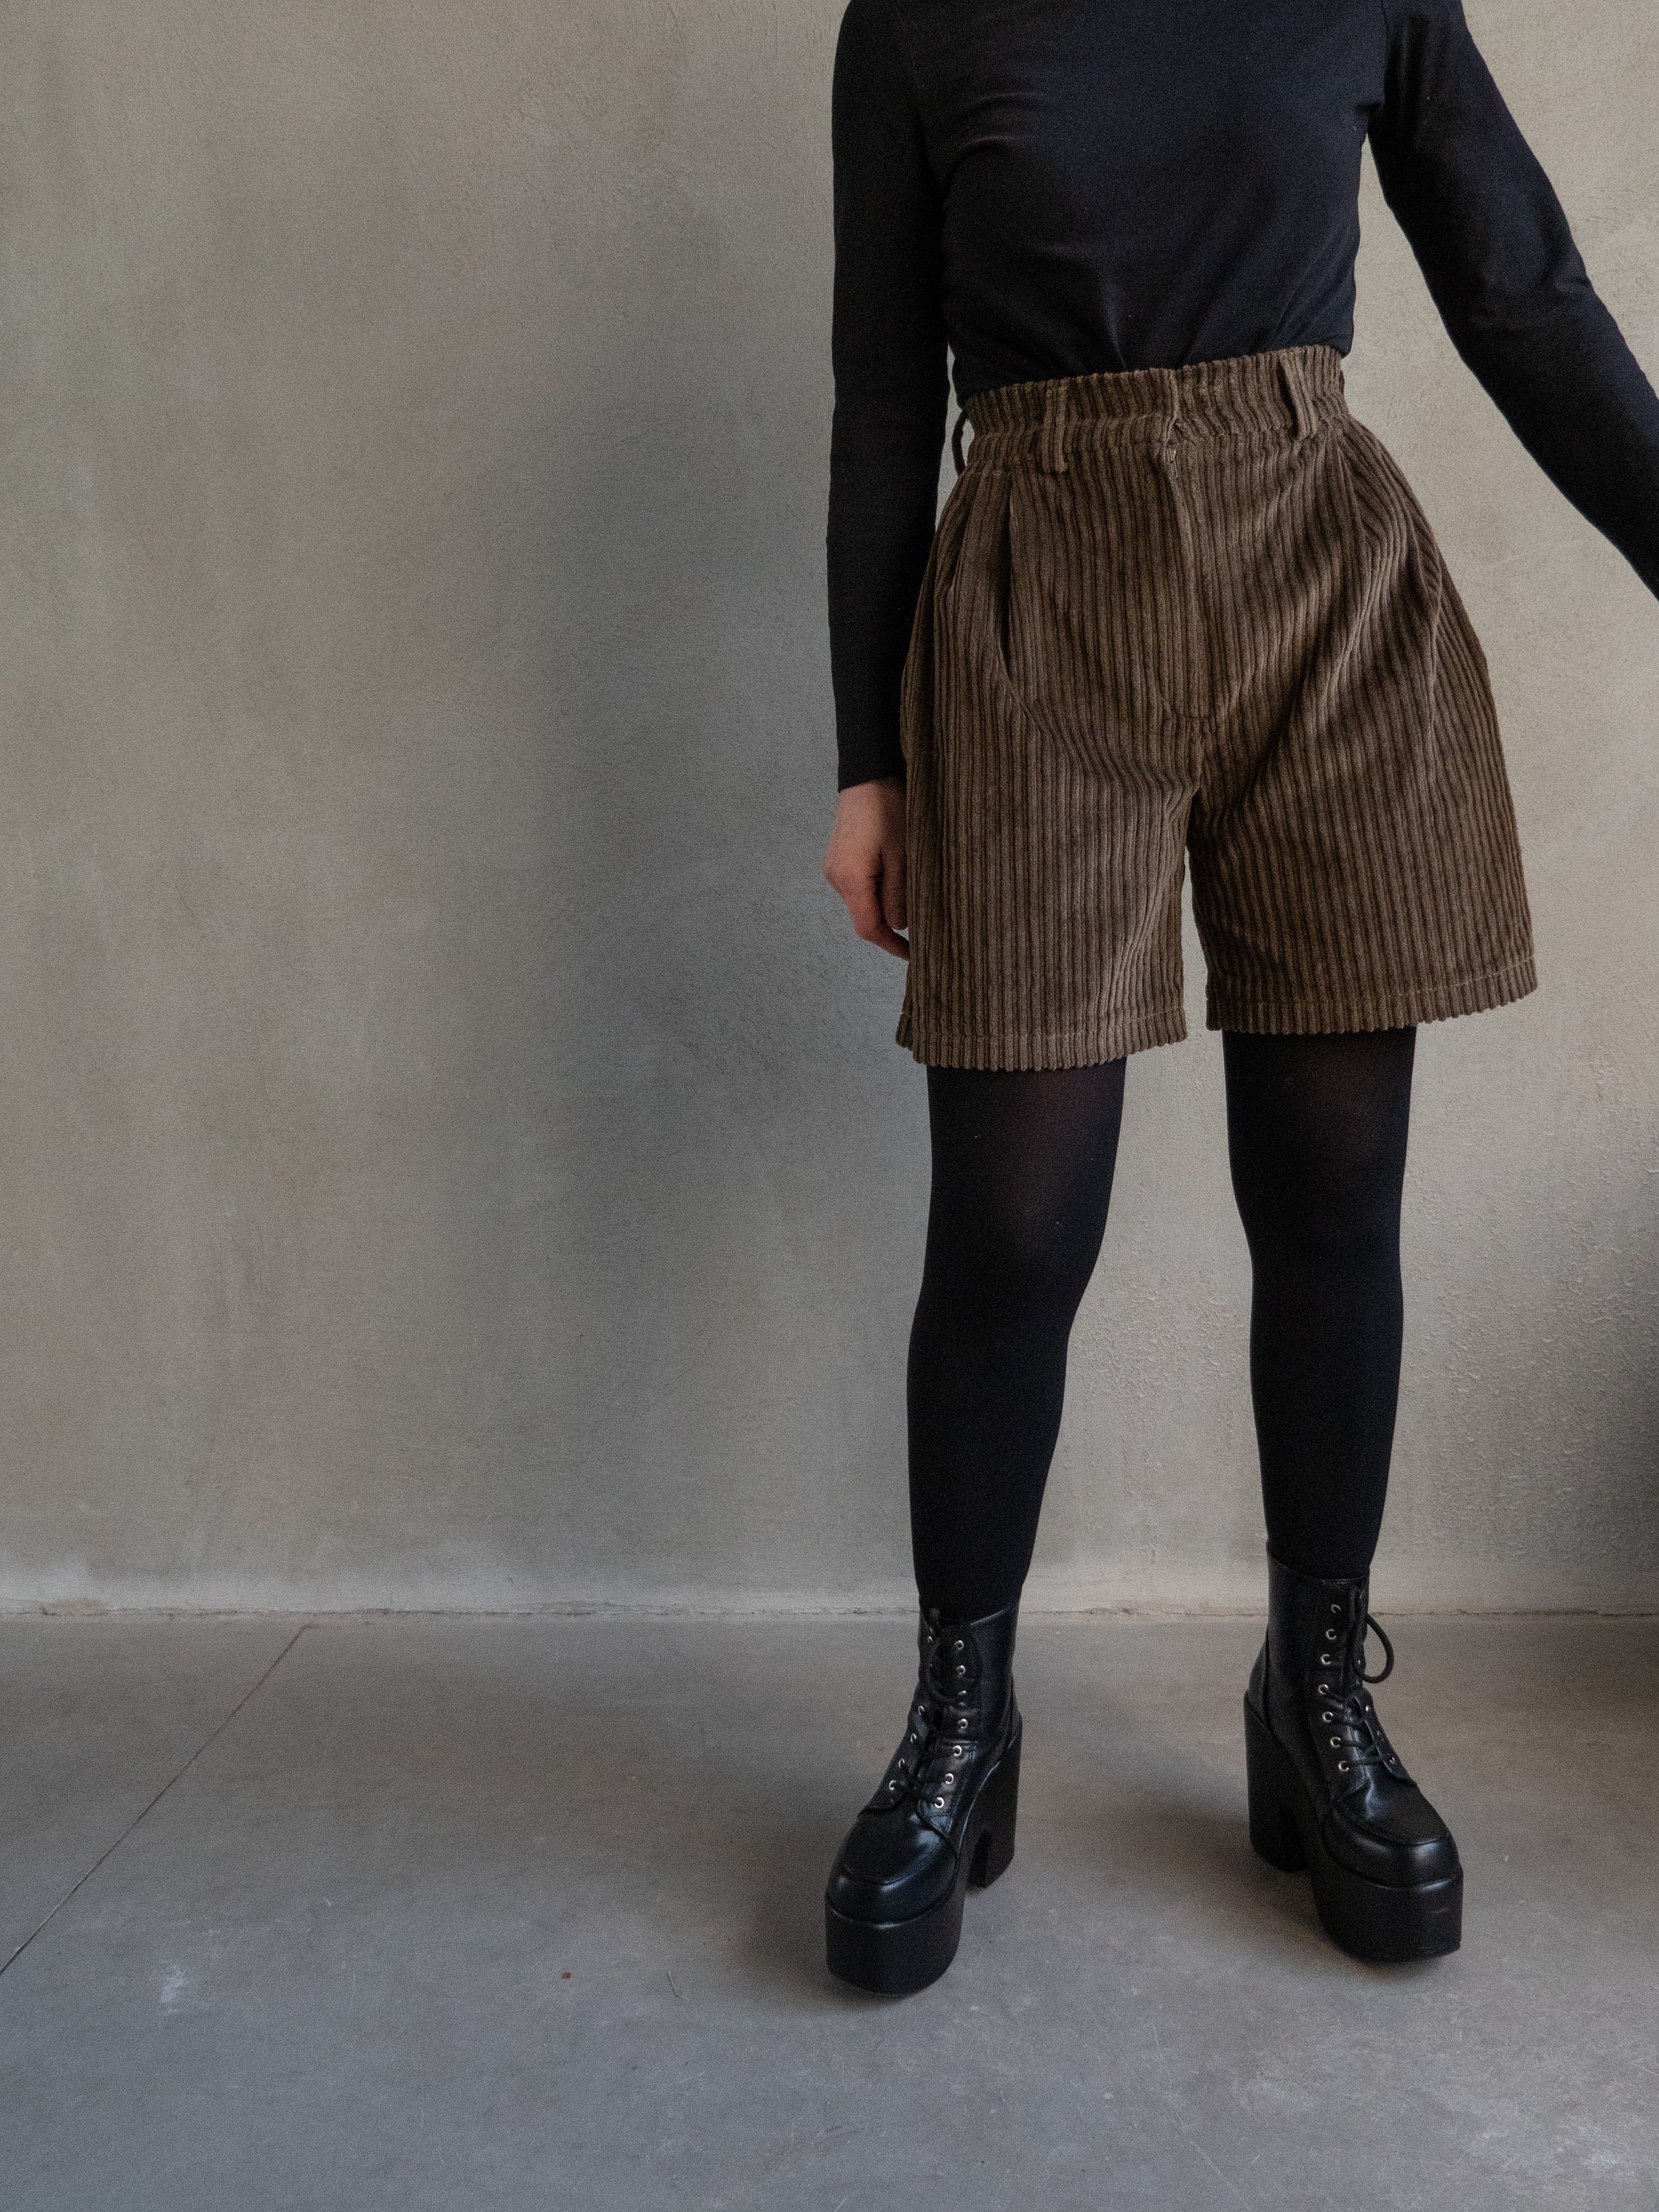 High Waisted Corduroy Shorts for Women With Pockets Wide Leg - Etsy